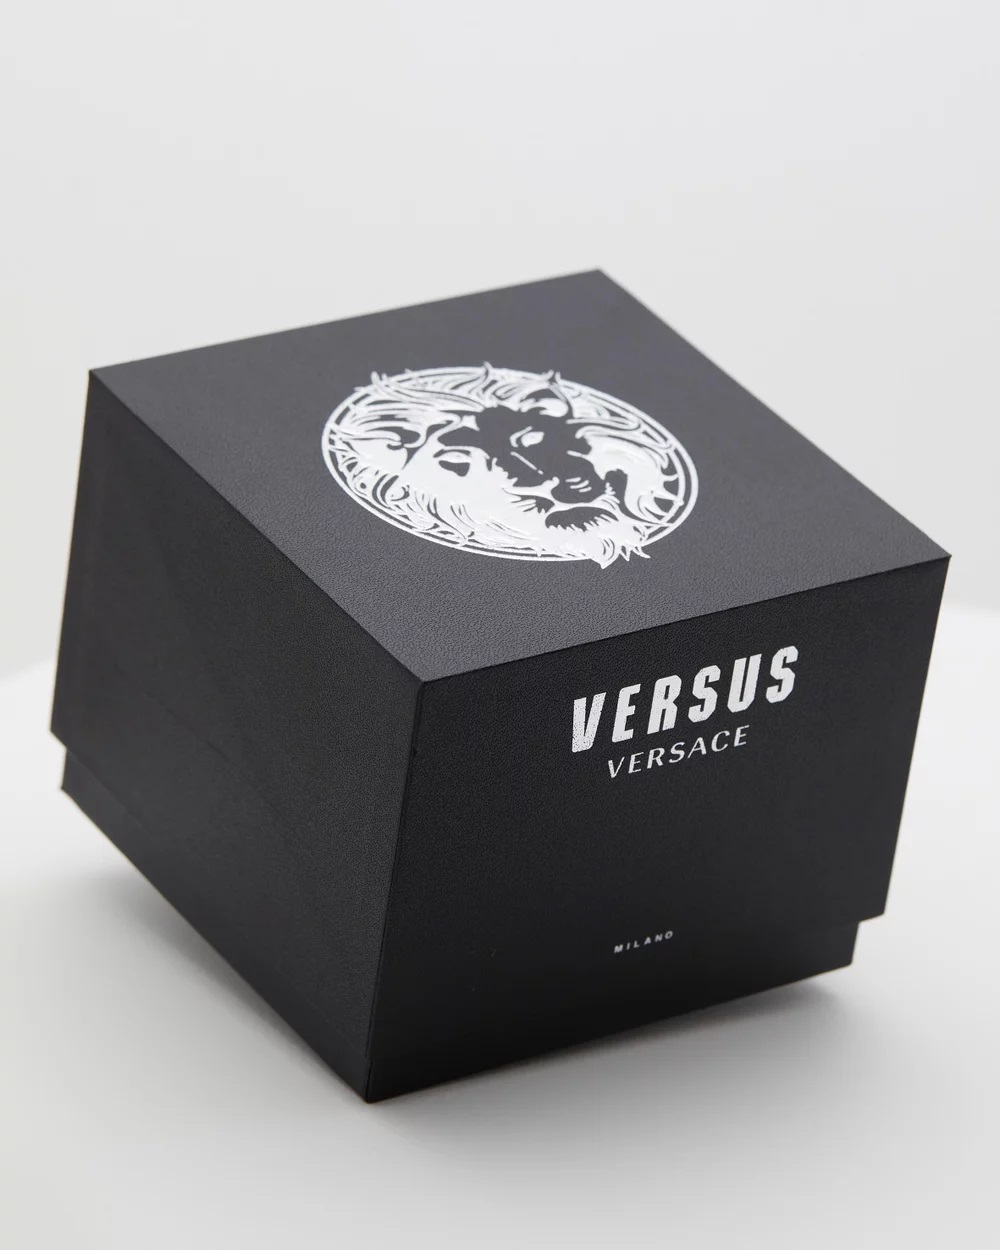 ĐỒNG HỒ NỮ DÂY KIM LOẠI VERSUS BY VERSACE WEHO TWO TONE STAINLESS STEEL BRACELET 6